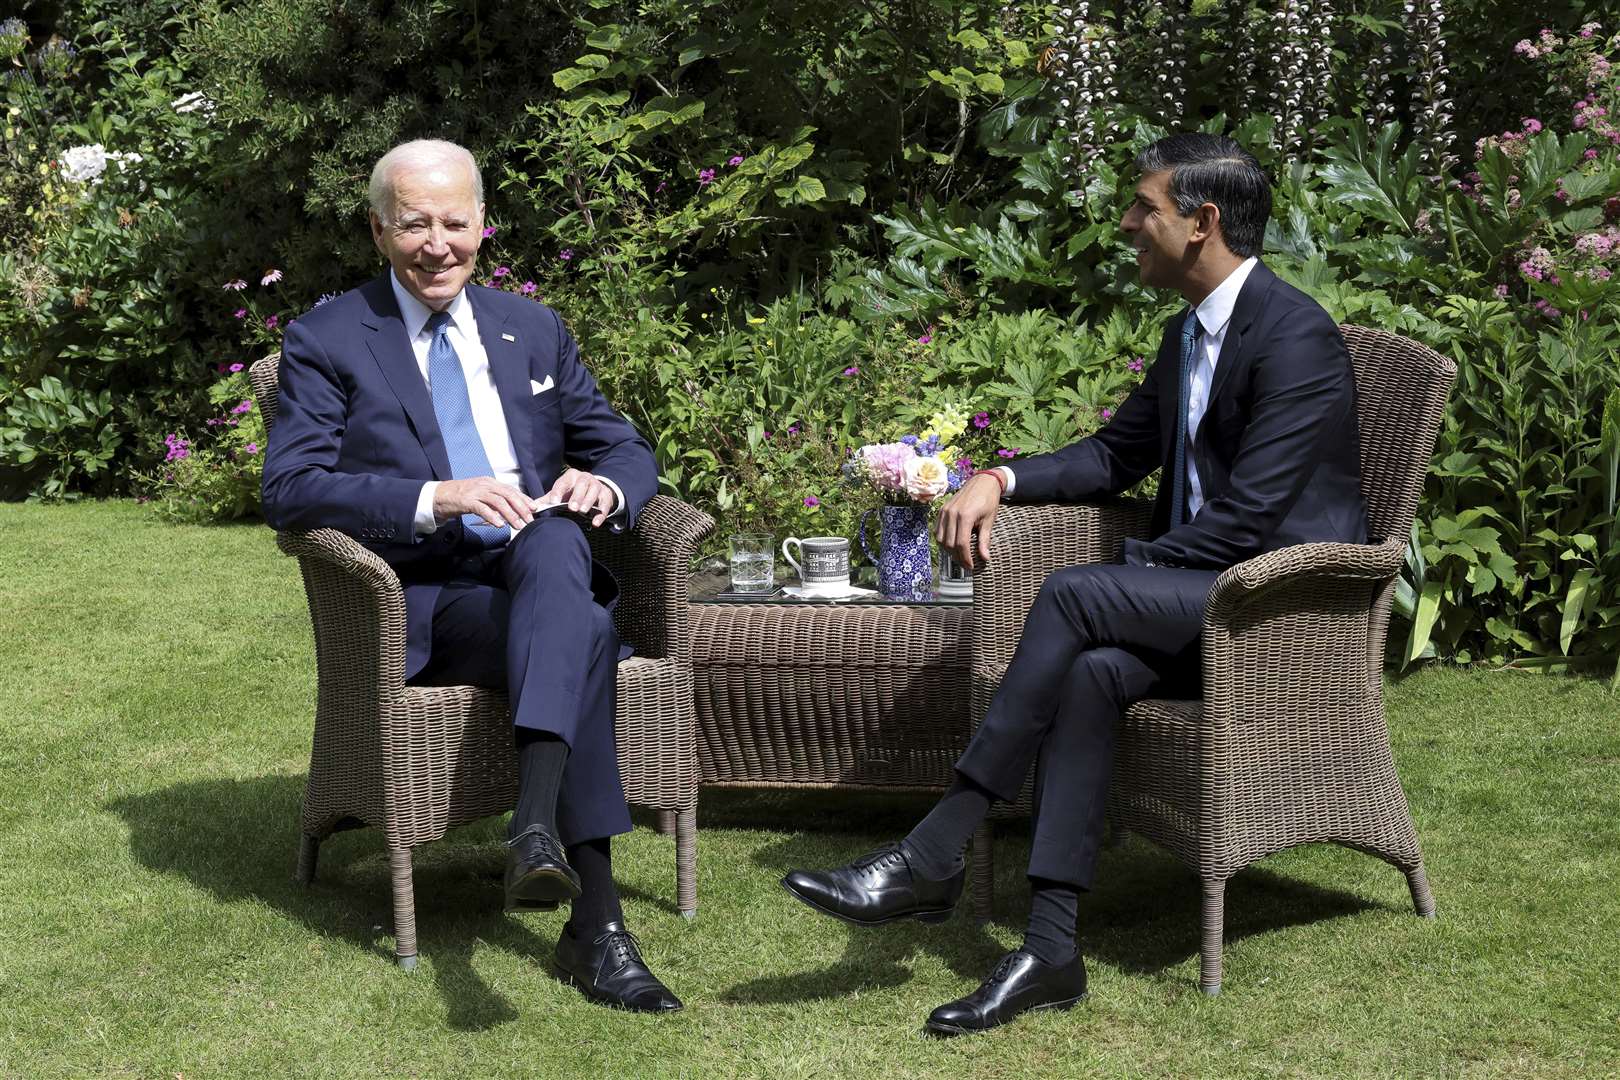 Mr Sunak and Mr Biden posed for pictures in the Downing Street garden (Suzanne Plunkett/AP)